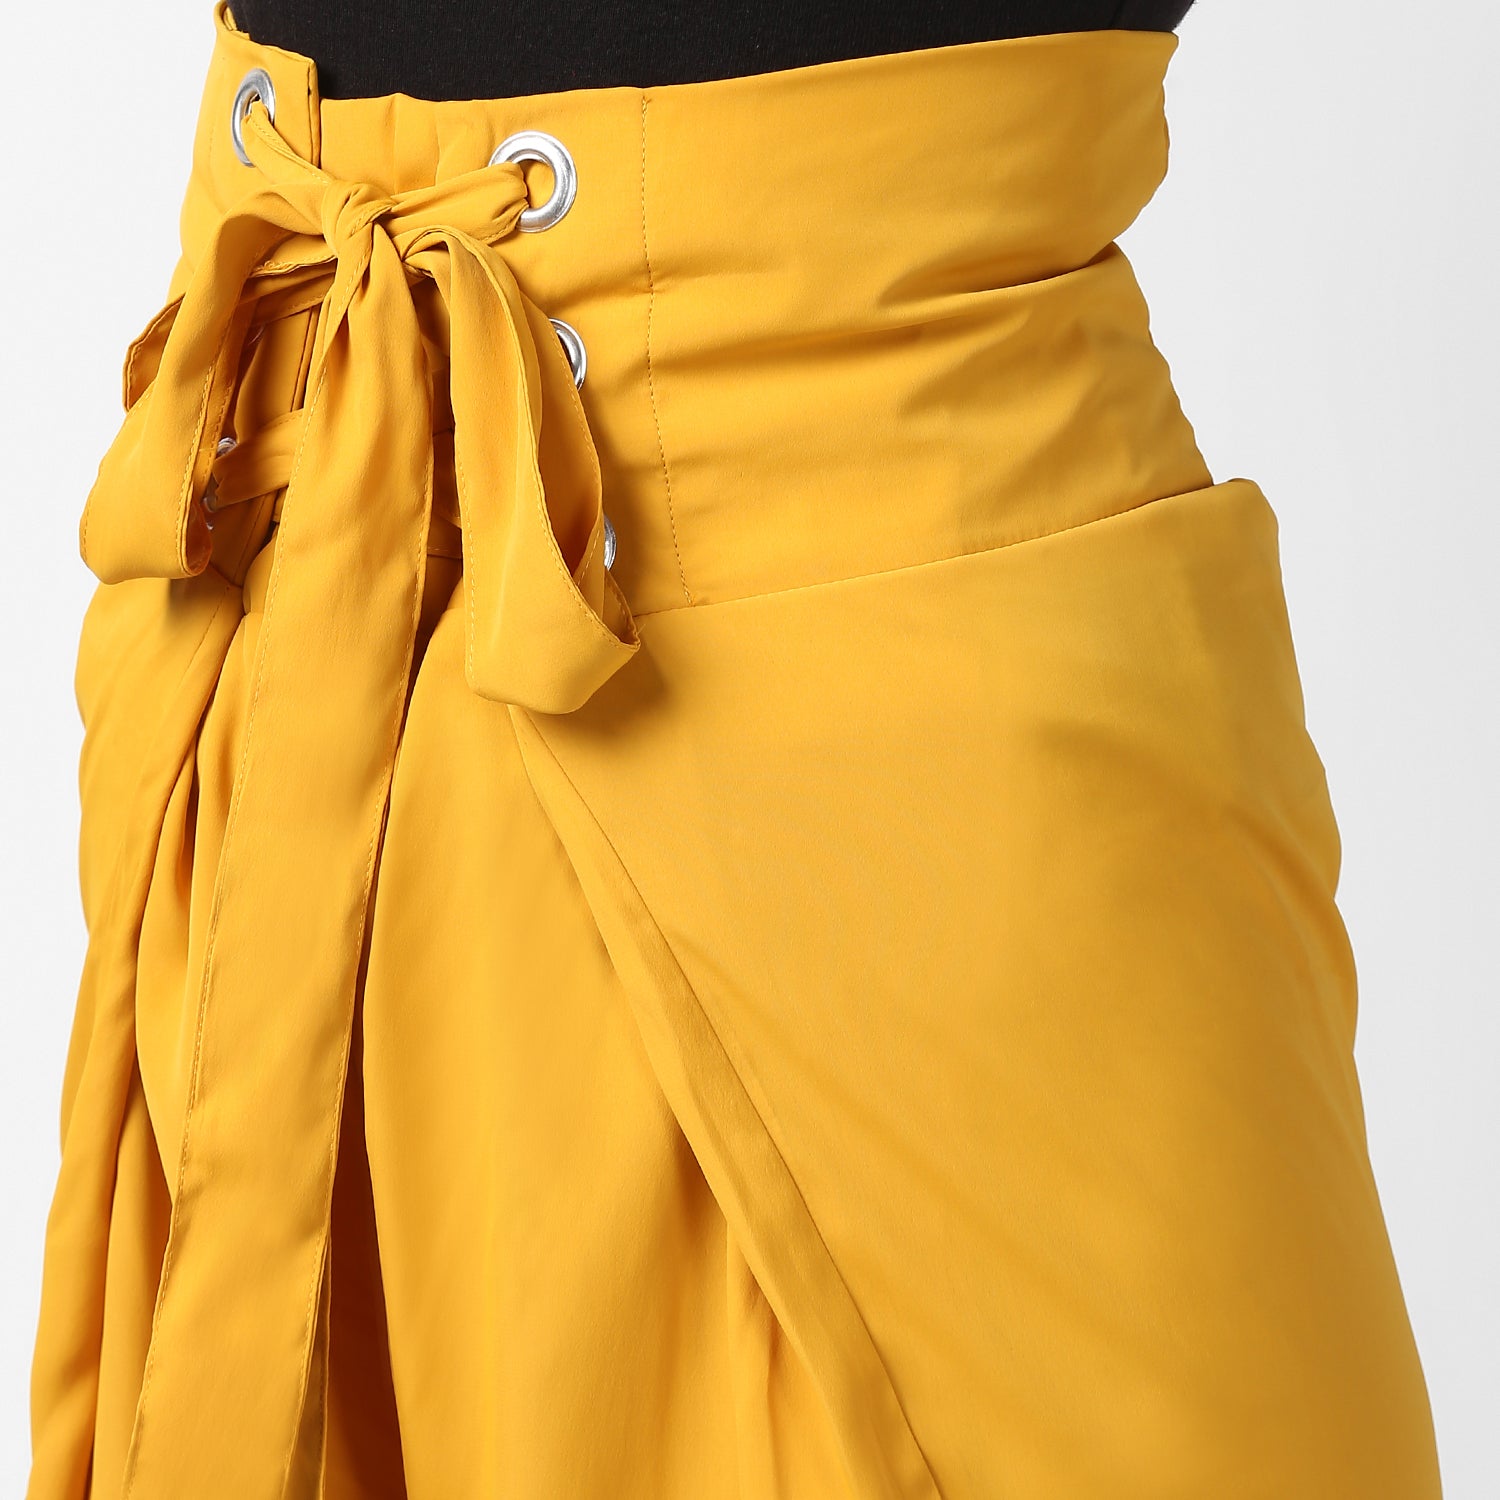 Women's Yellow Polyester High Waisted Palazzo with front Rivets and Back Elastic - StyleStone